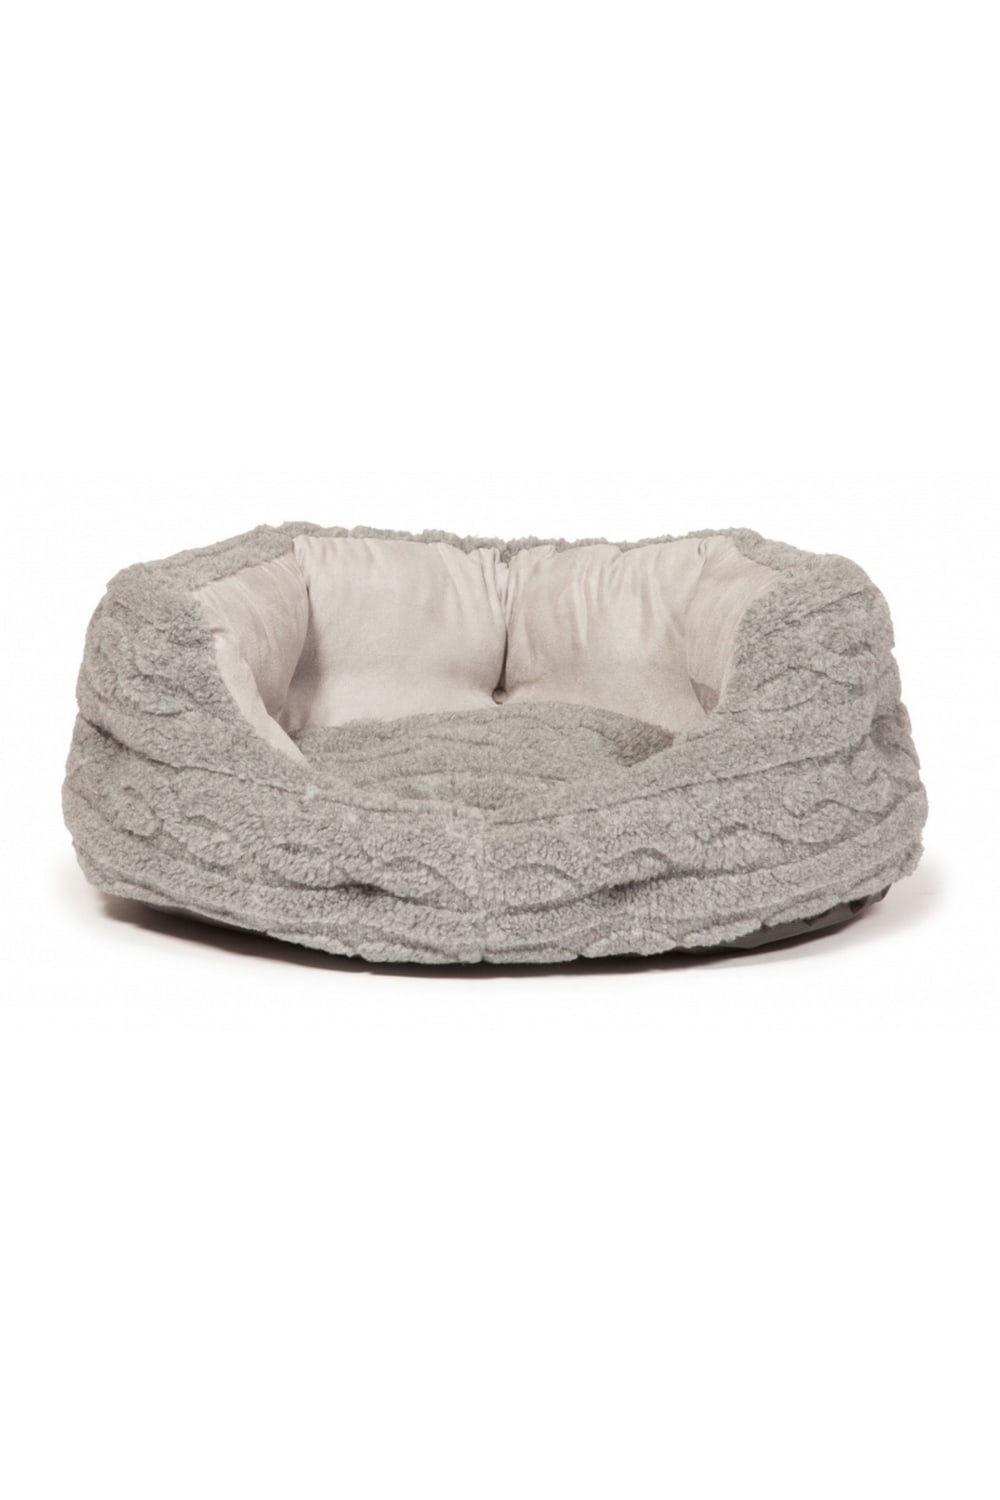 Danish Design Pet Products Bobble Cable Knit Deluxe Slumber Bed (Pewter) (29.9in)